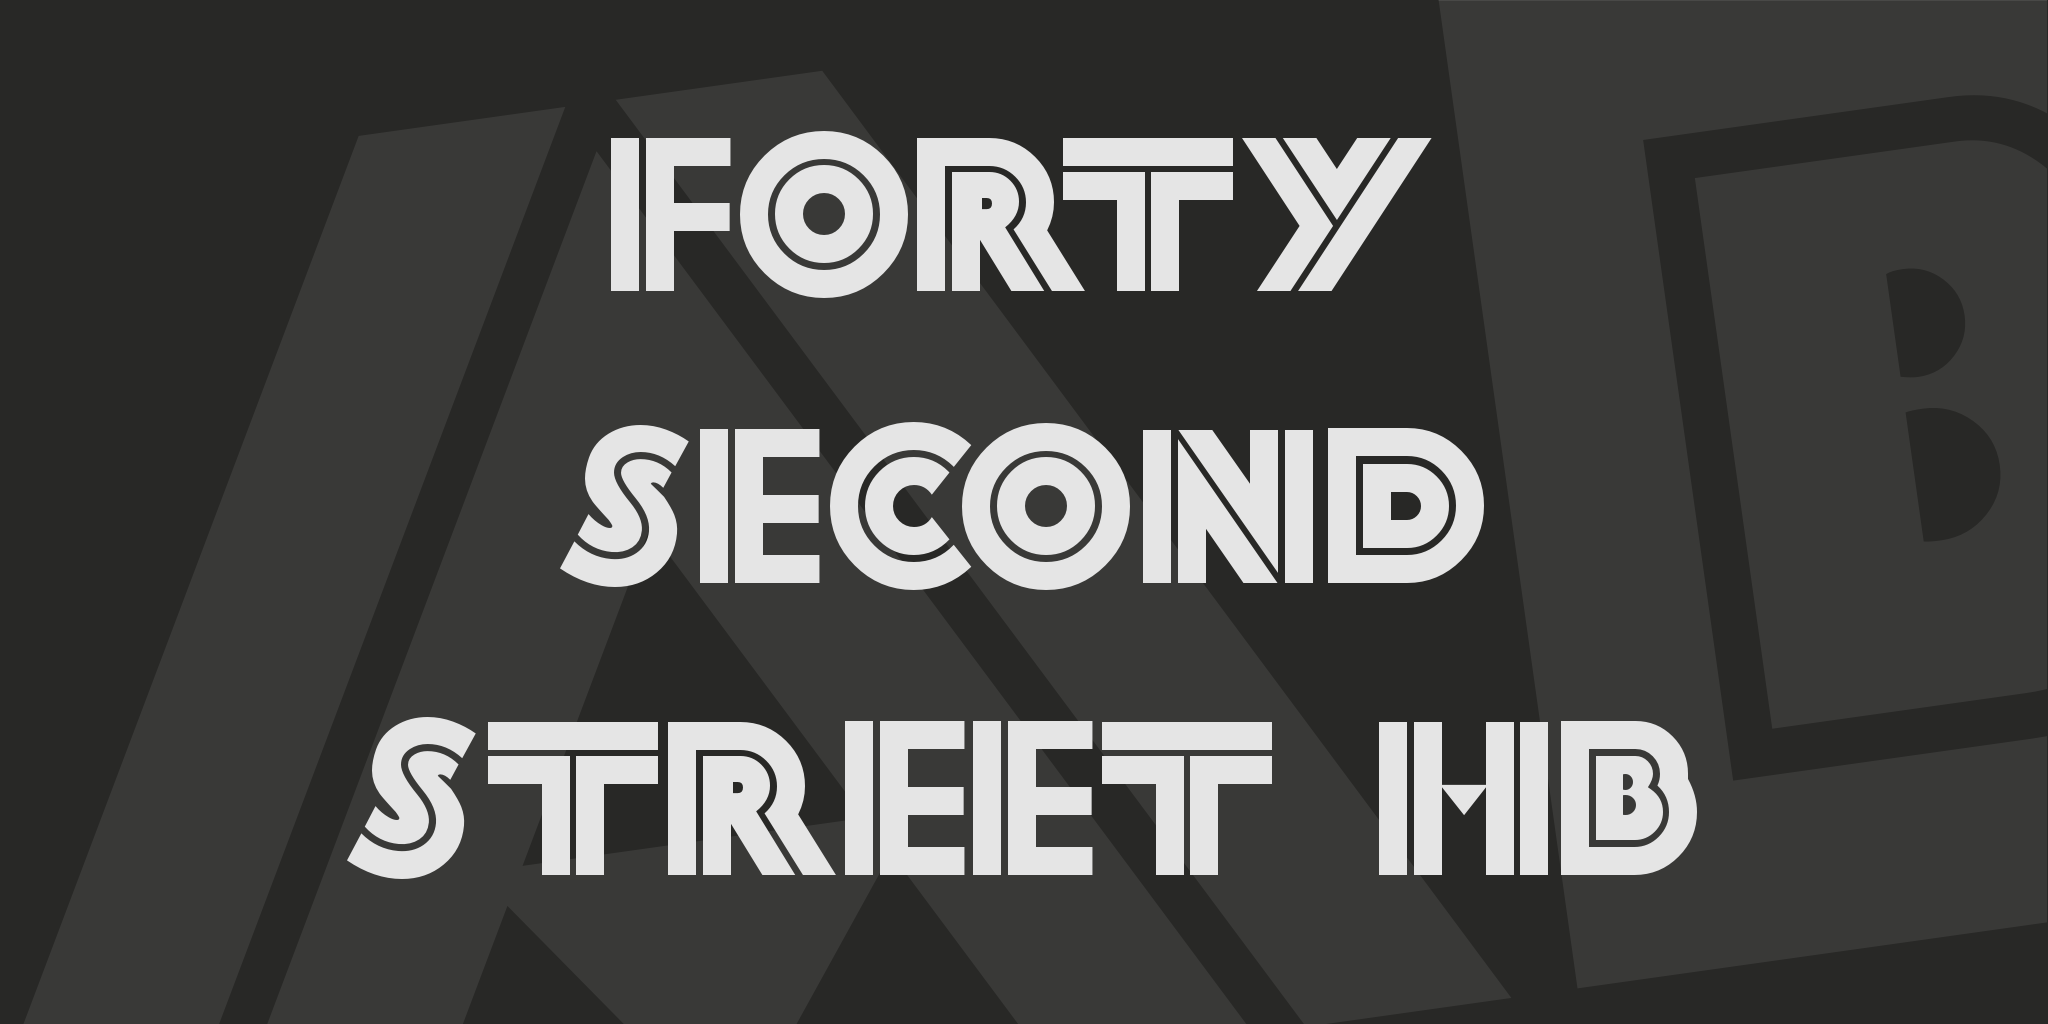 Forty Second Street Hb